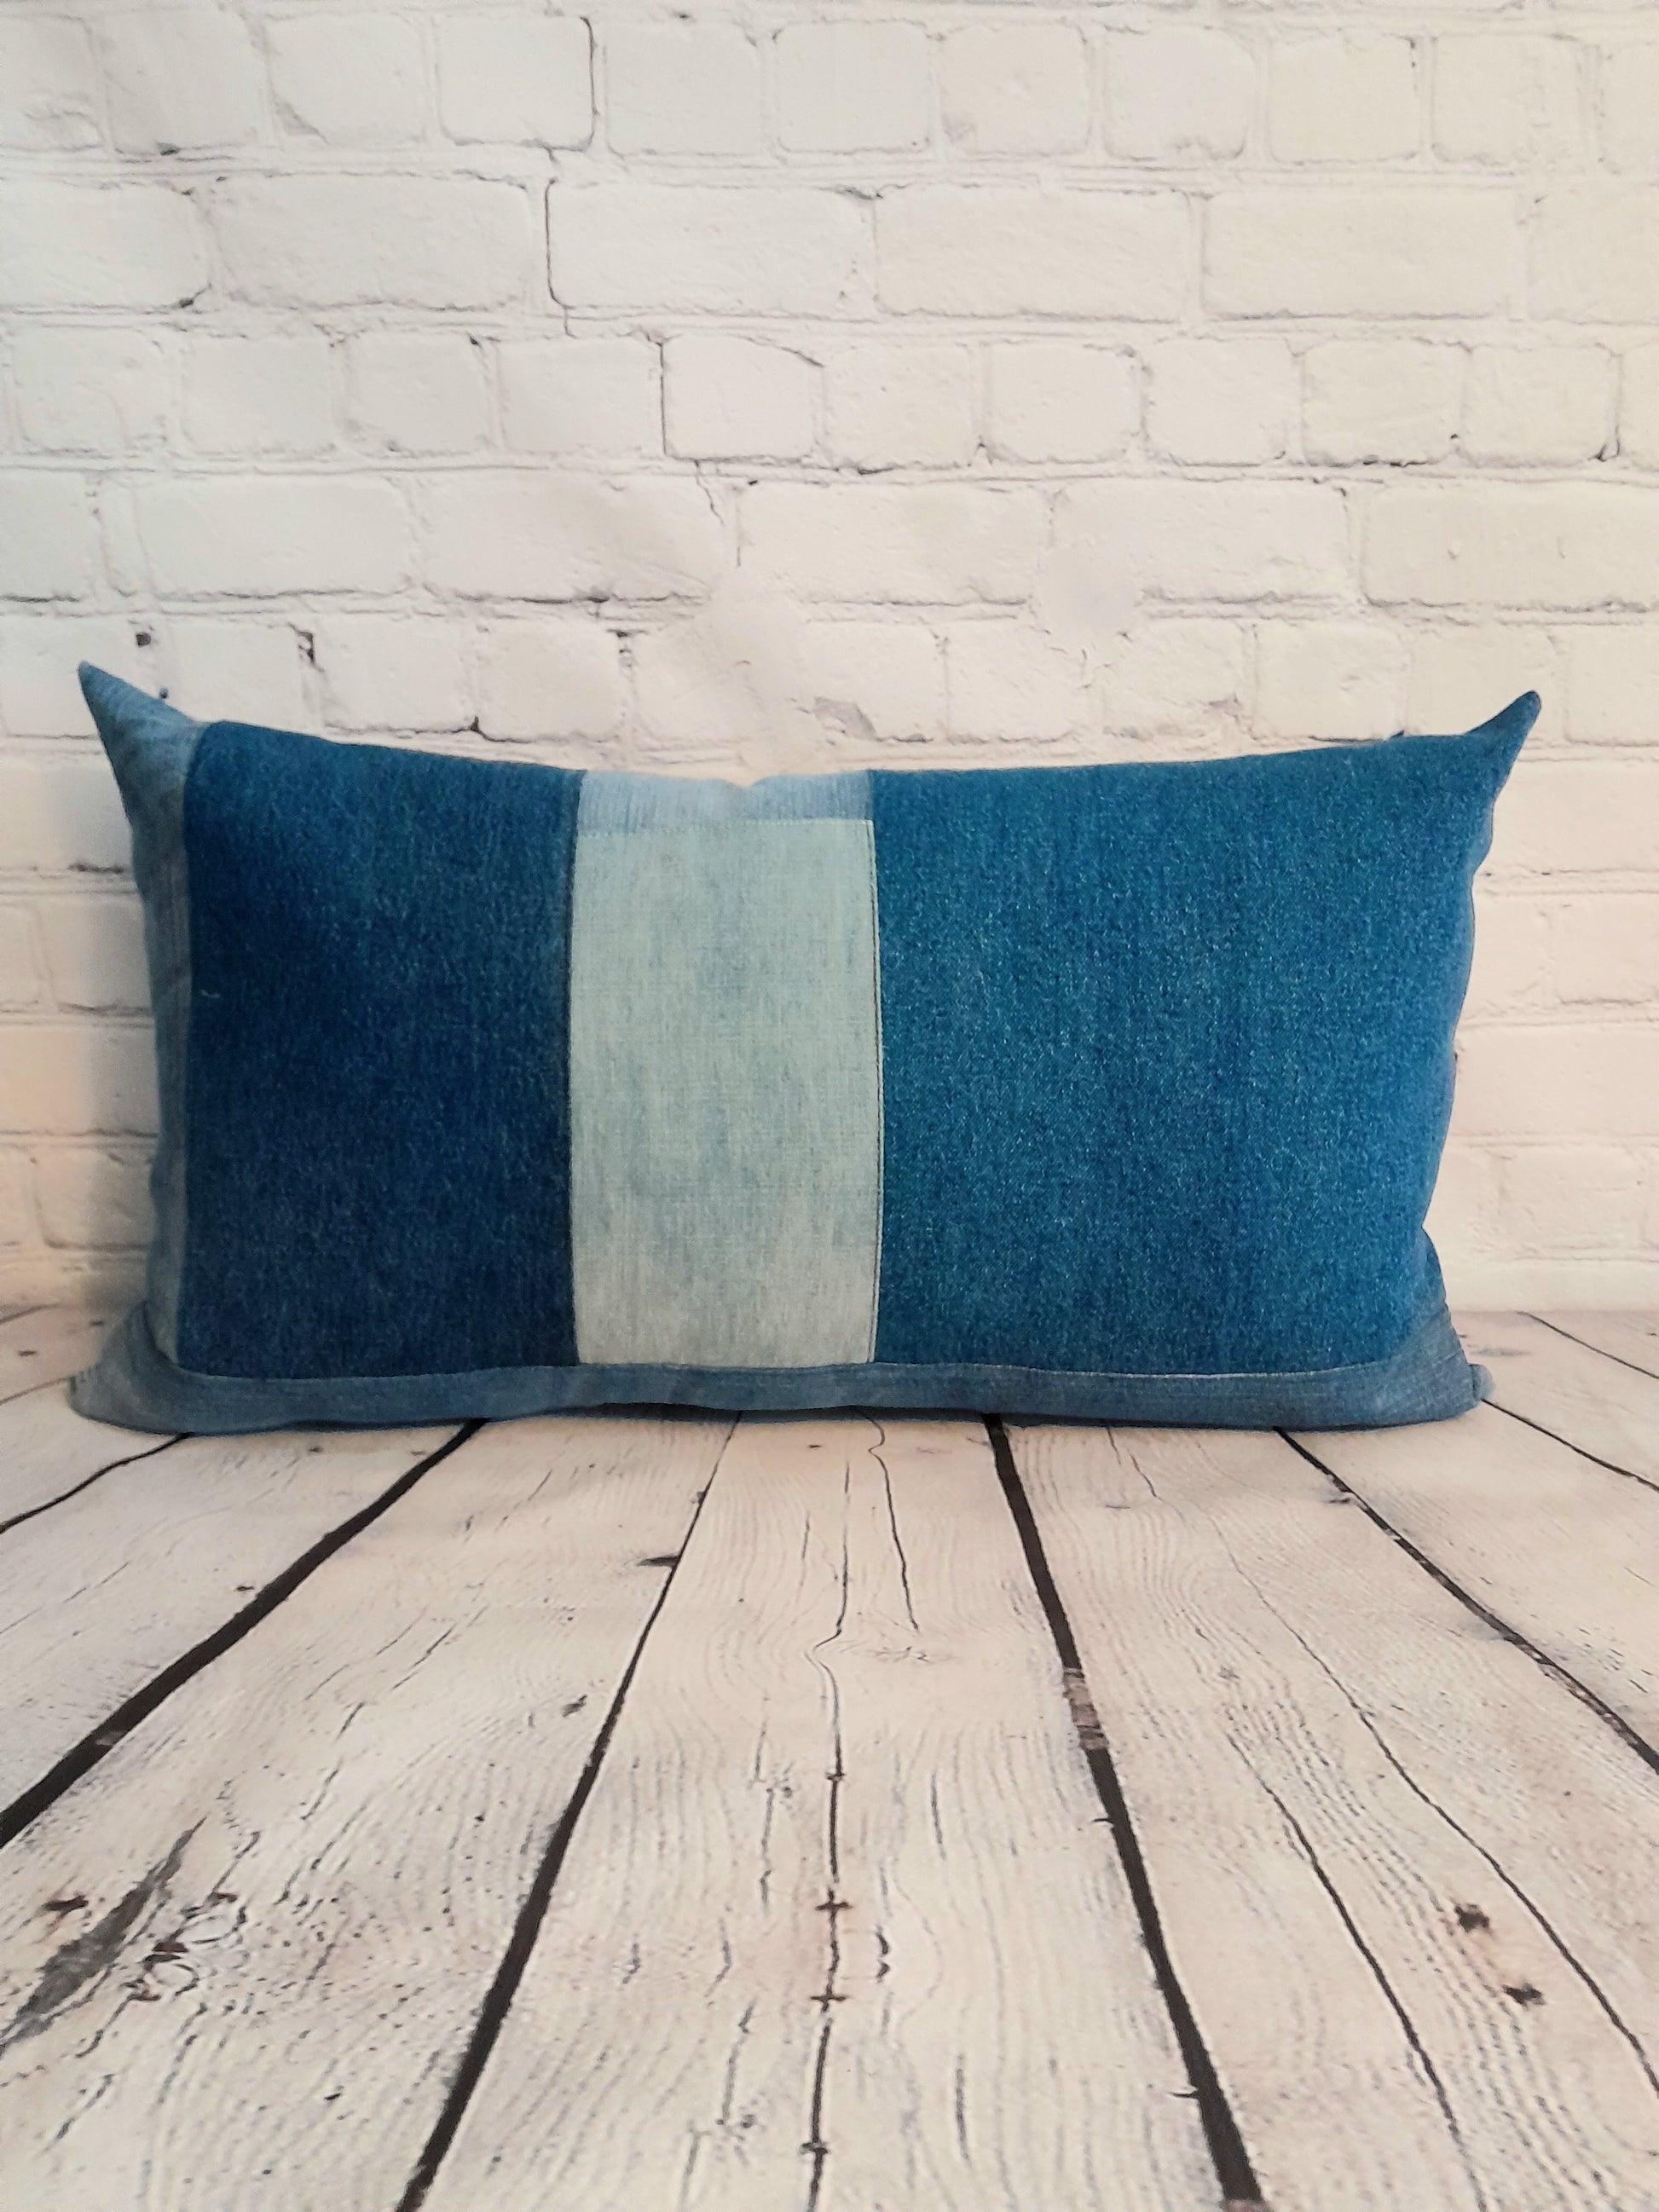 cushions made from old jeans